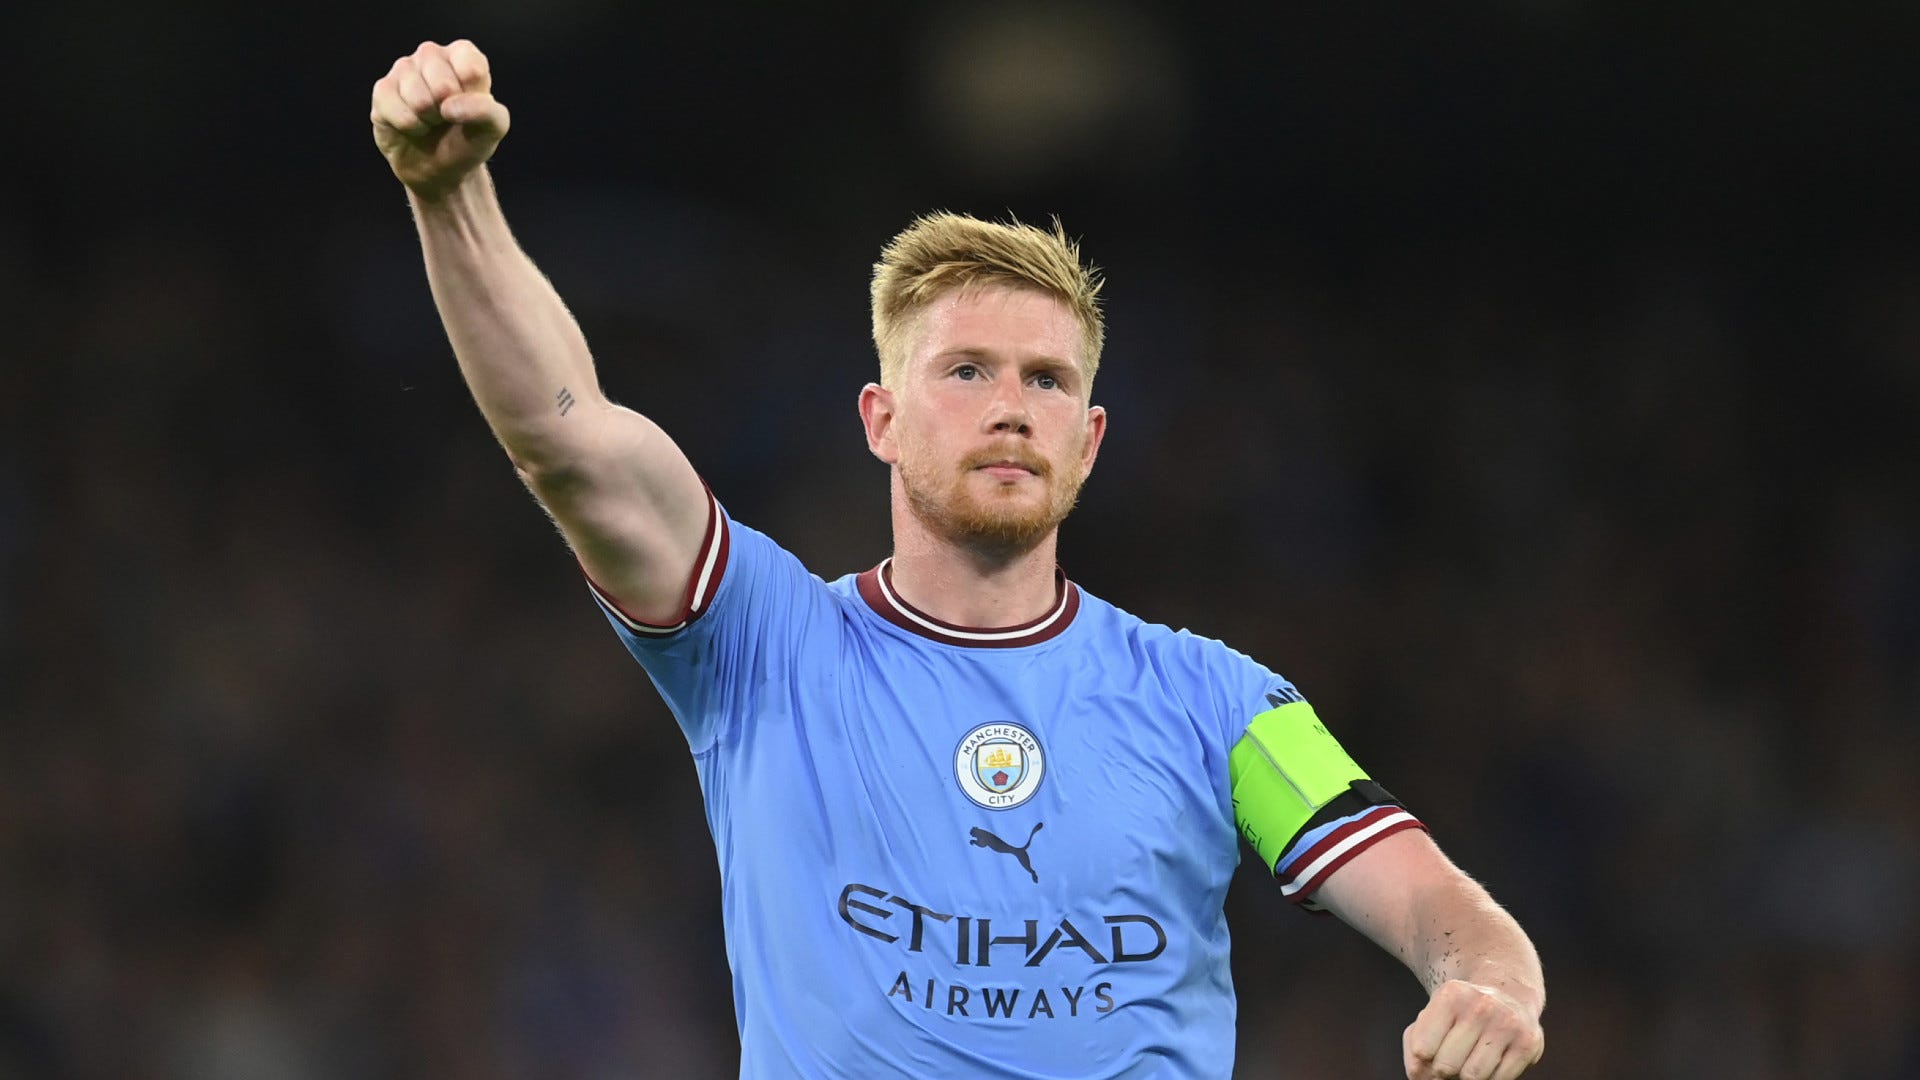 The assist king! De Bruyne overtakes David Silva to become Man City's most creative Premier League player ever | Goal.com India